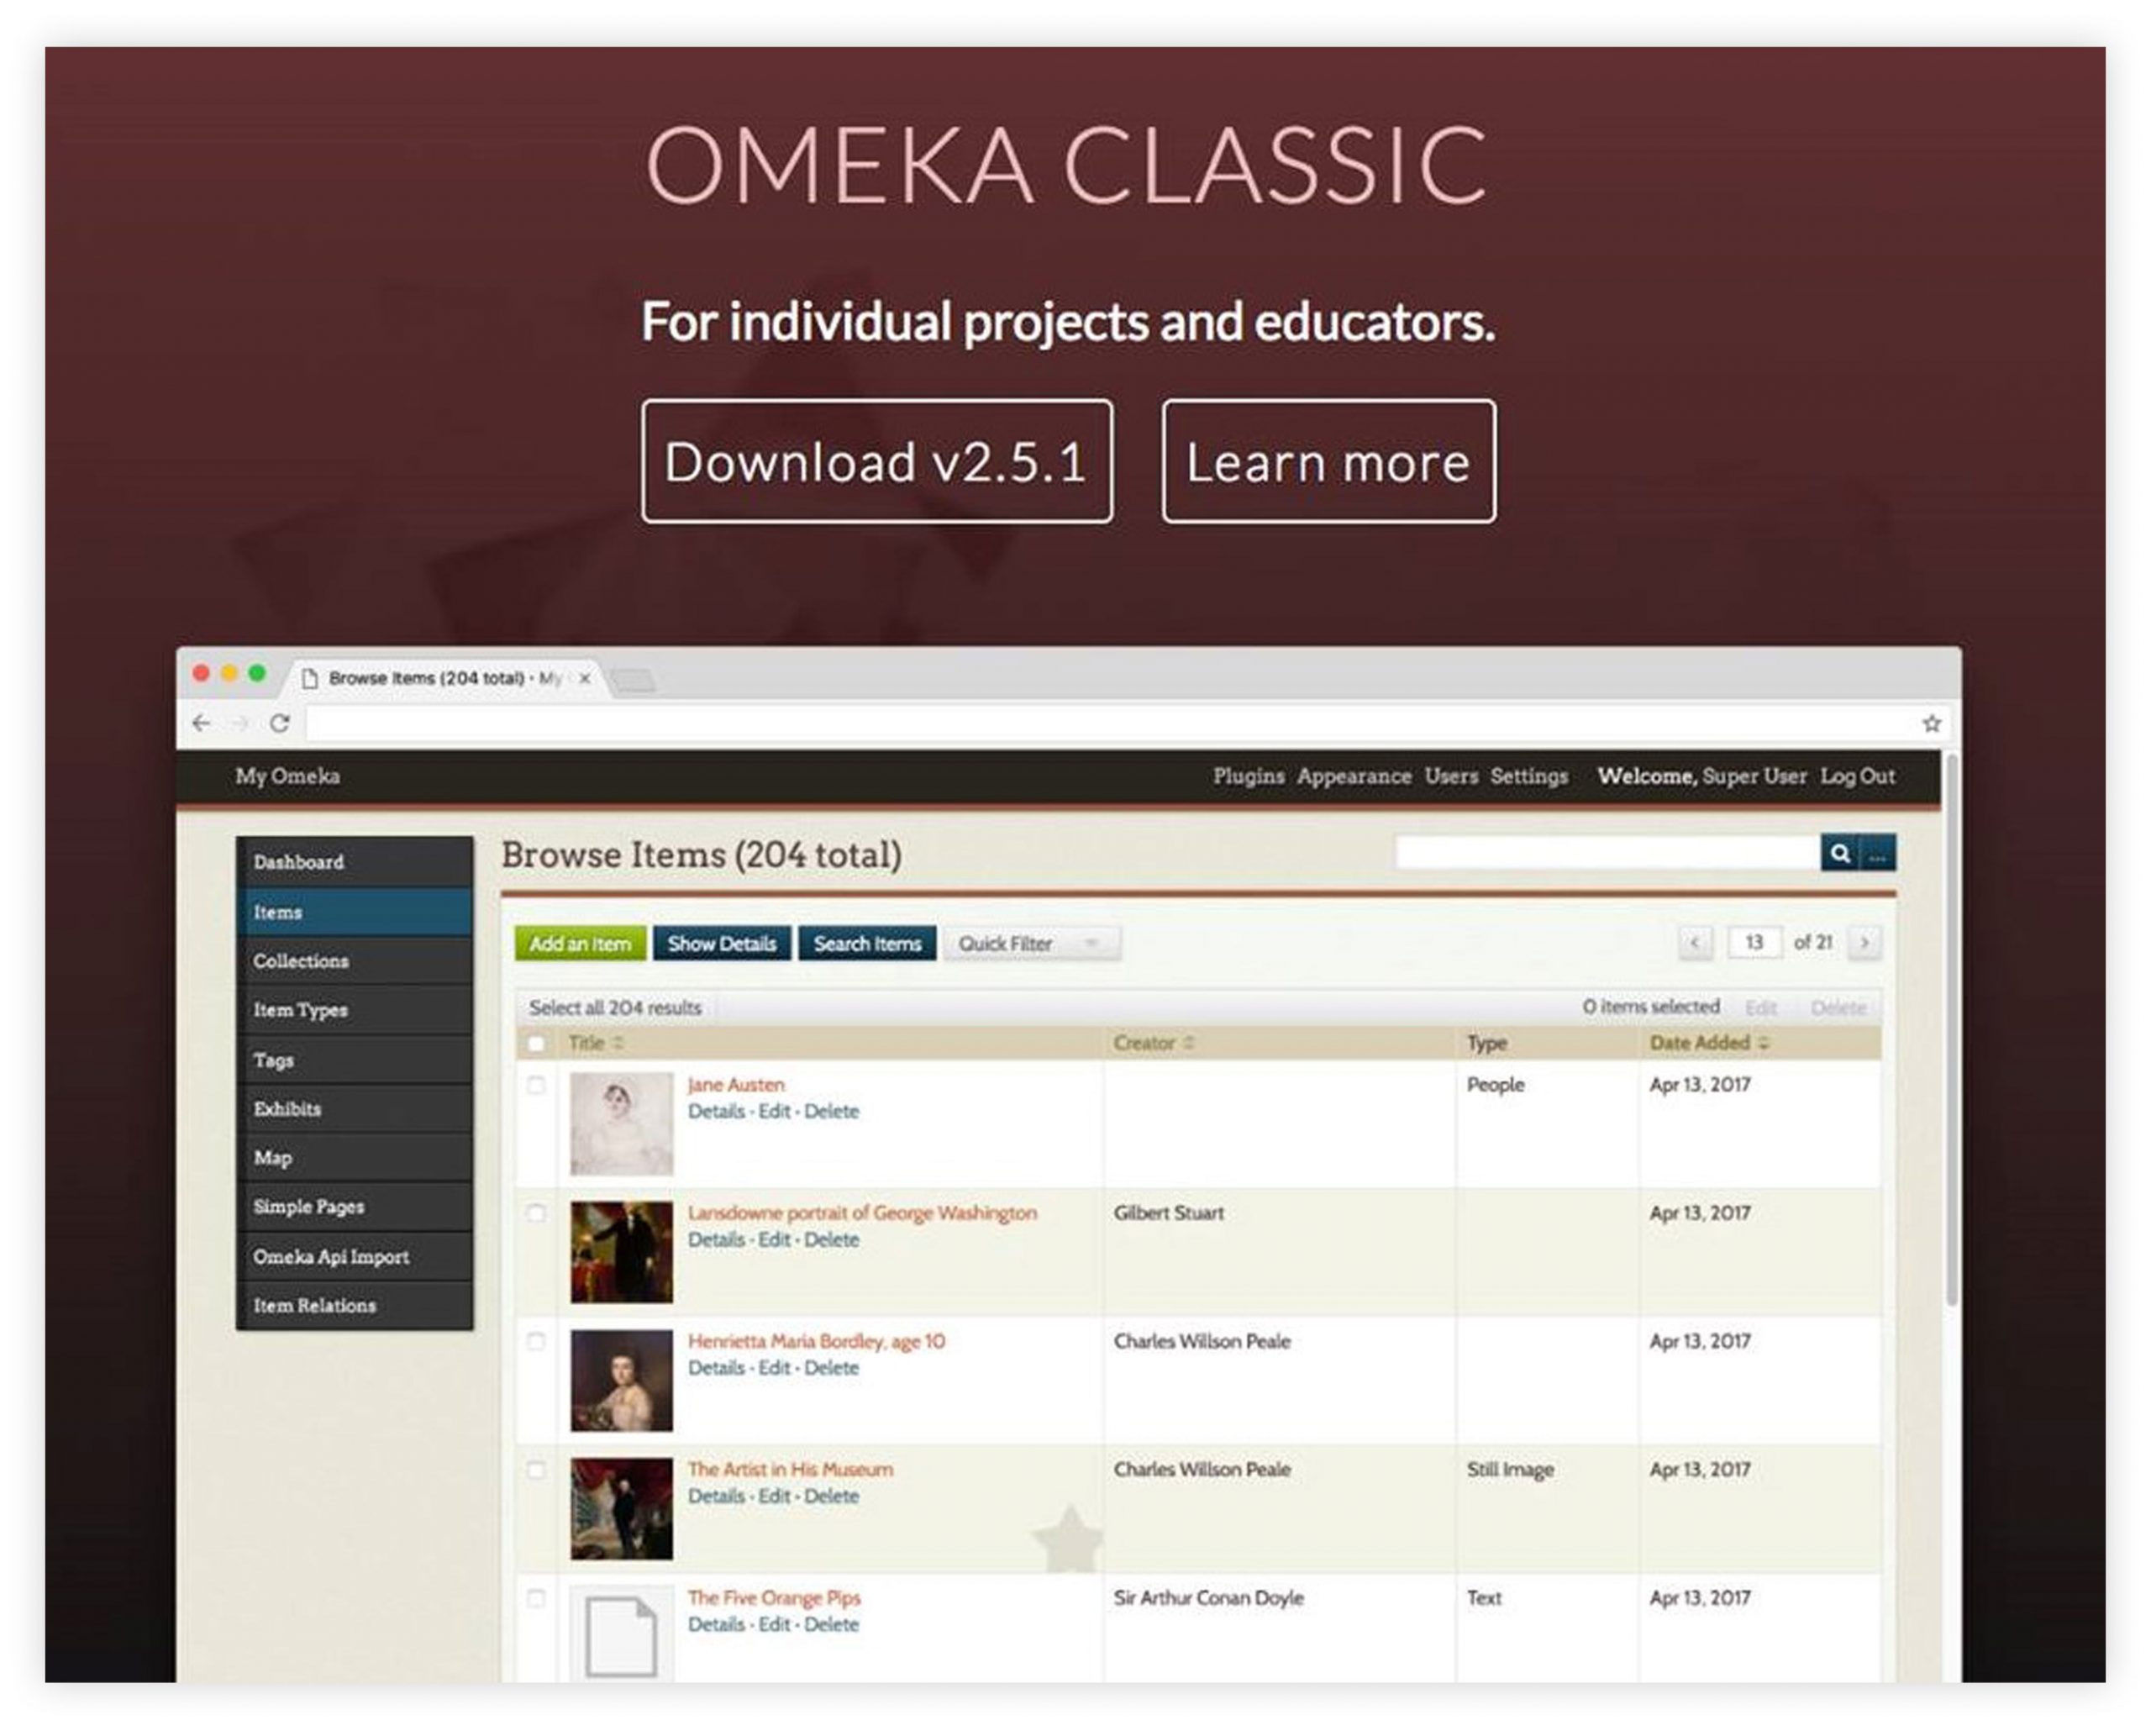 Screengrab of the Omeka website which reads, "OMEKA CLASSIC — For individual projects and educators."